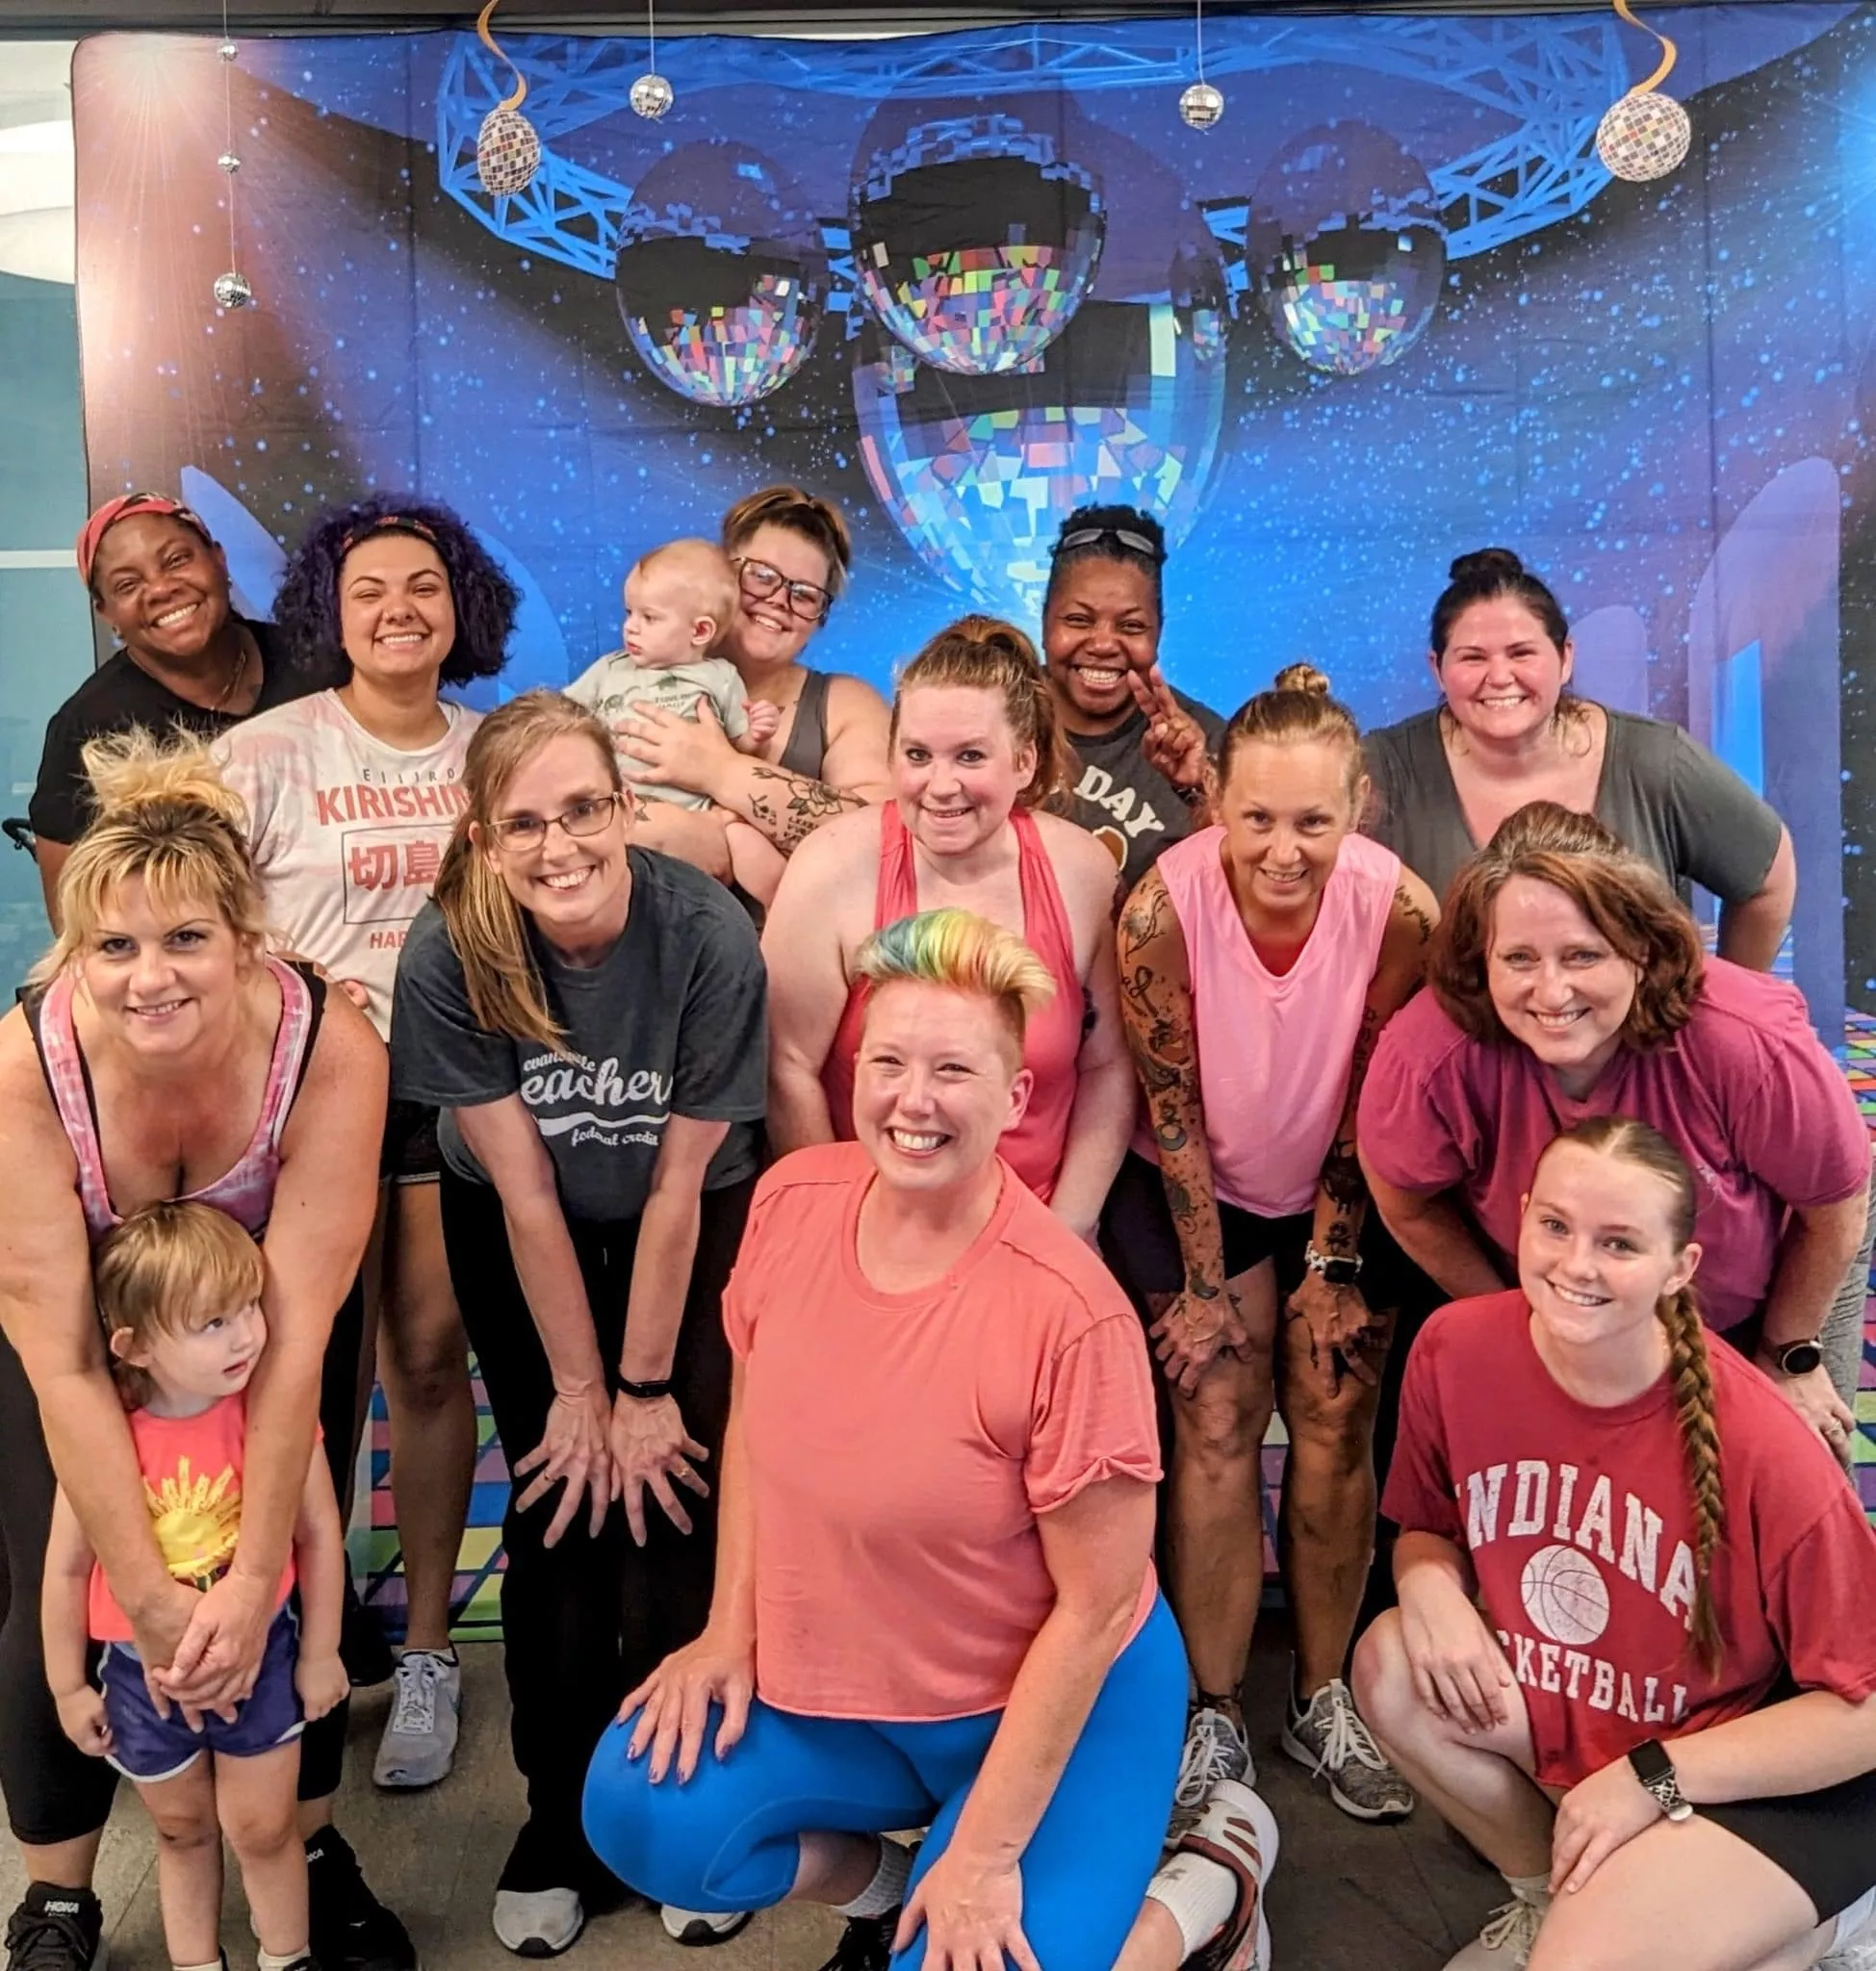 several people in exercise clothes in front of disco themed backdrop